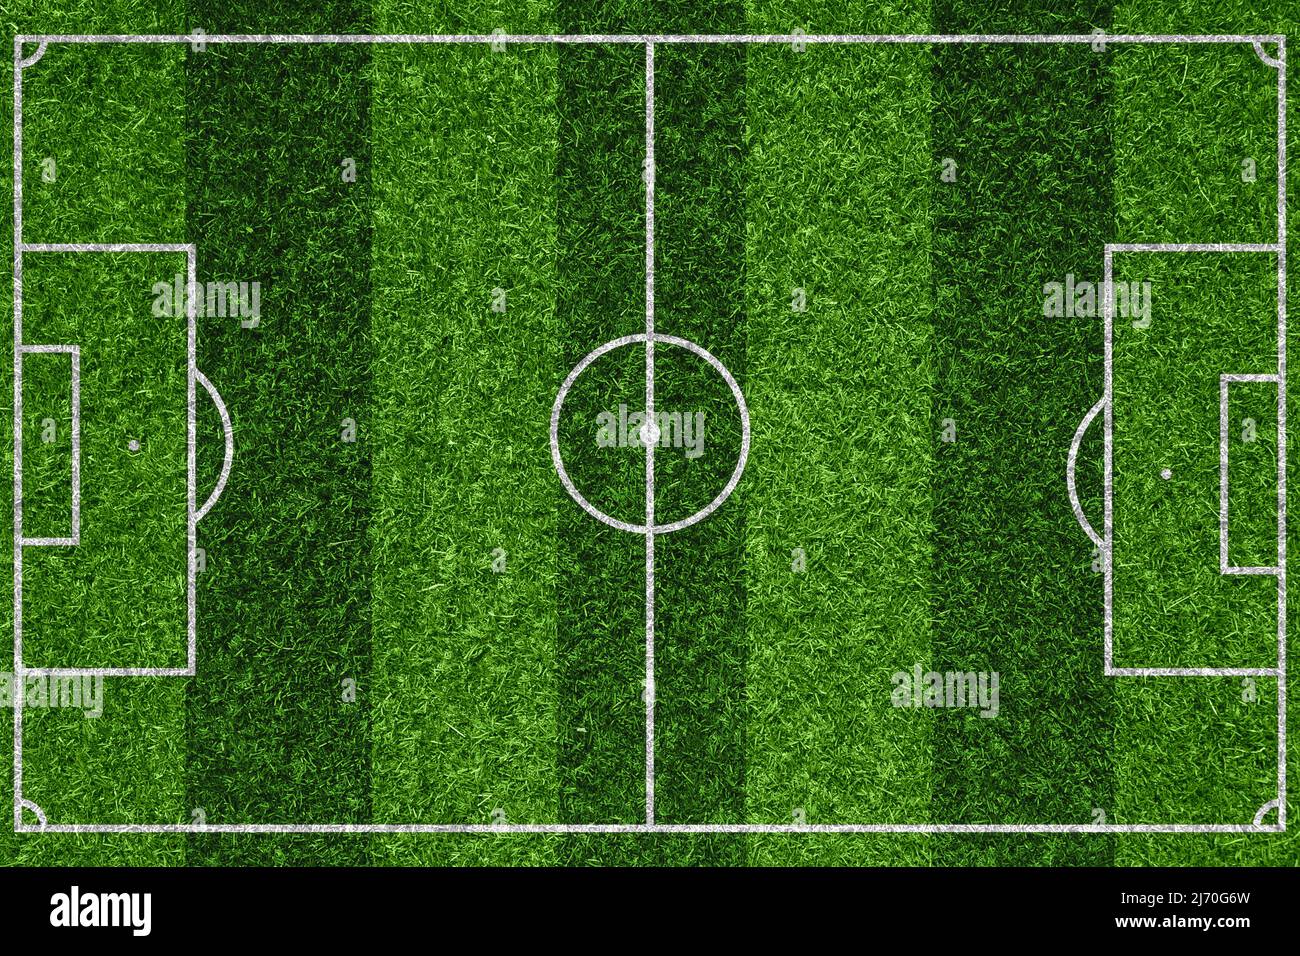 Football soccer pitch field sport outdoor court green grass with line  correct dimension for background Stock Photo - Alamy